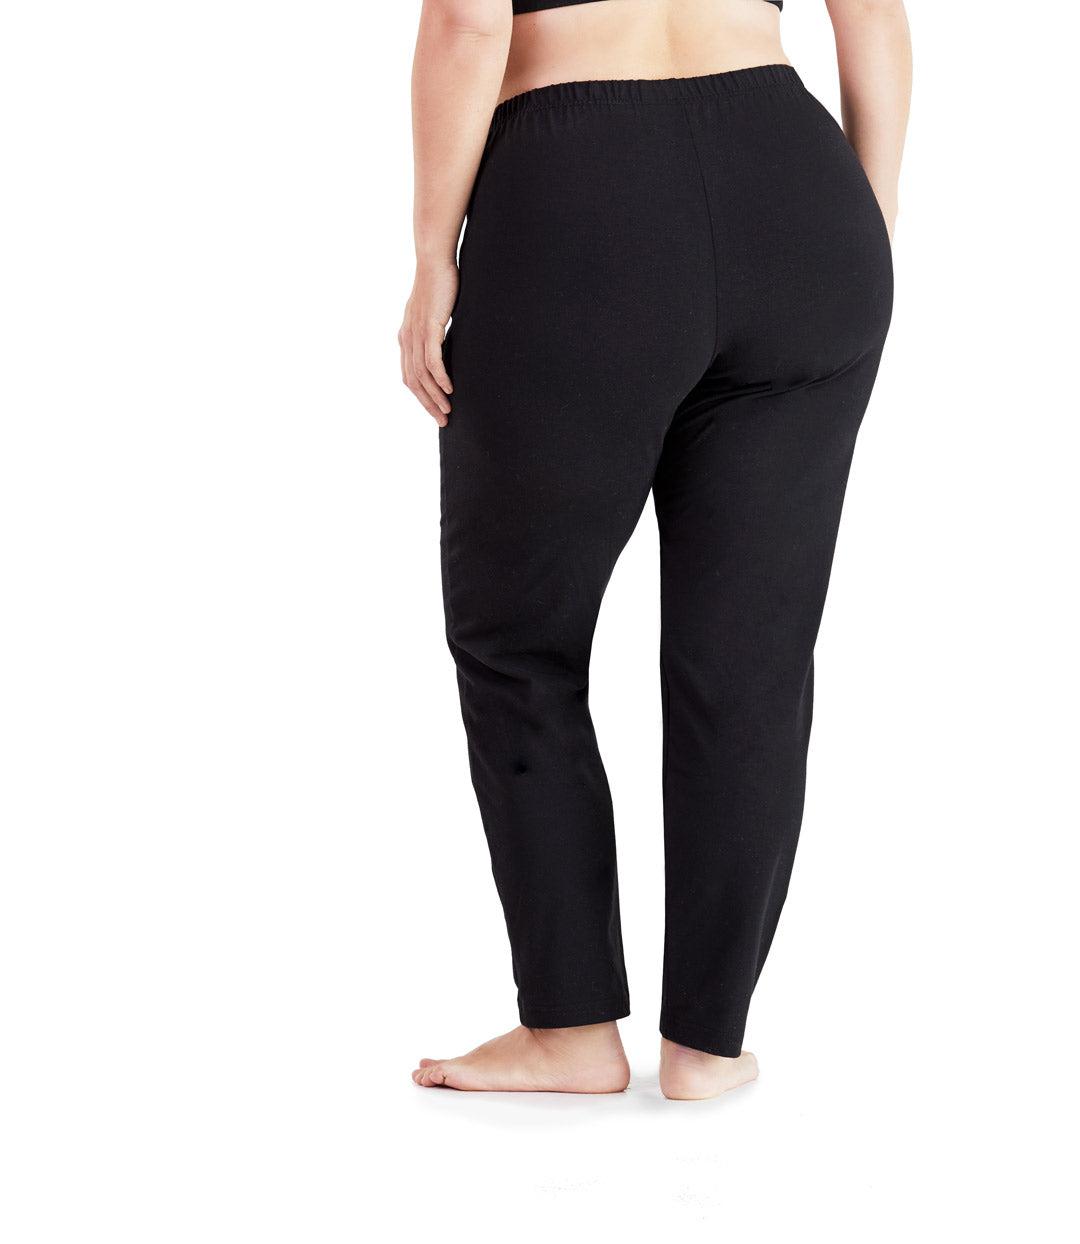 plus size yoga pants with pockets